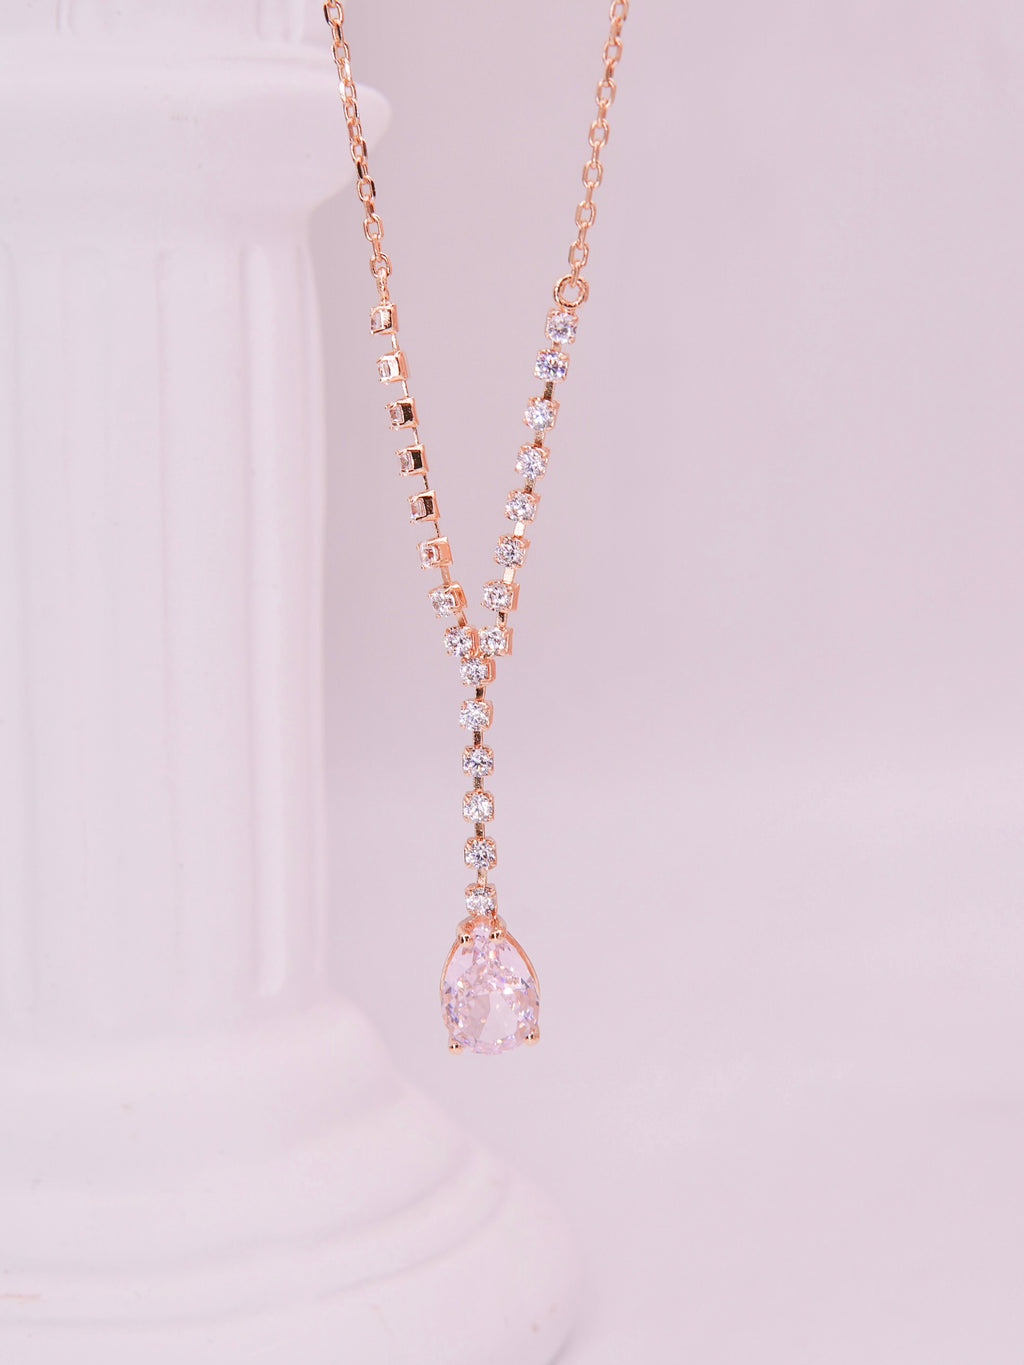 LAFIT· Rosy Mermaid - Necklace 仙氣公主櫻花粉摩根石頸鏈